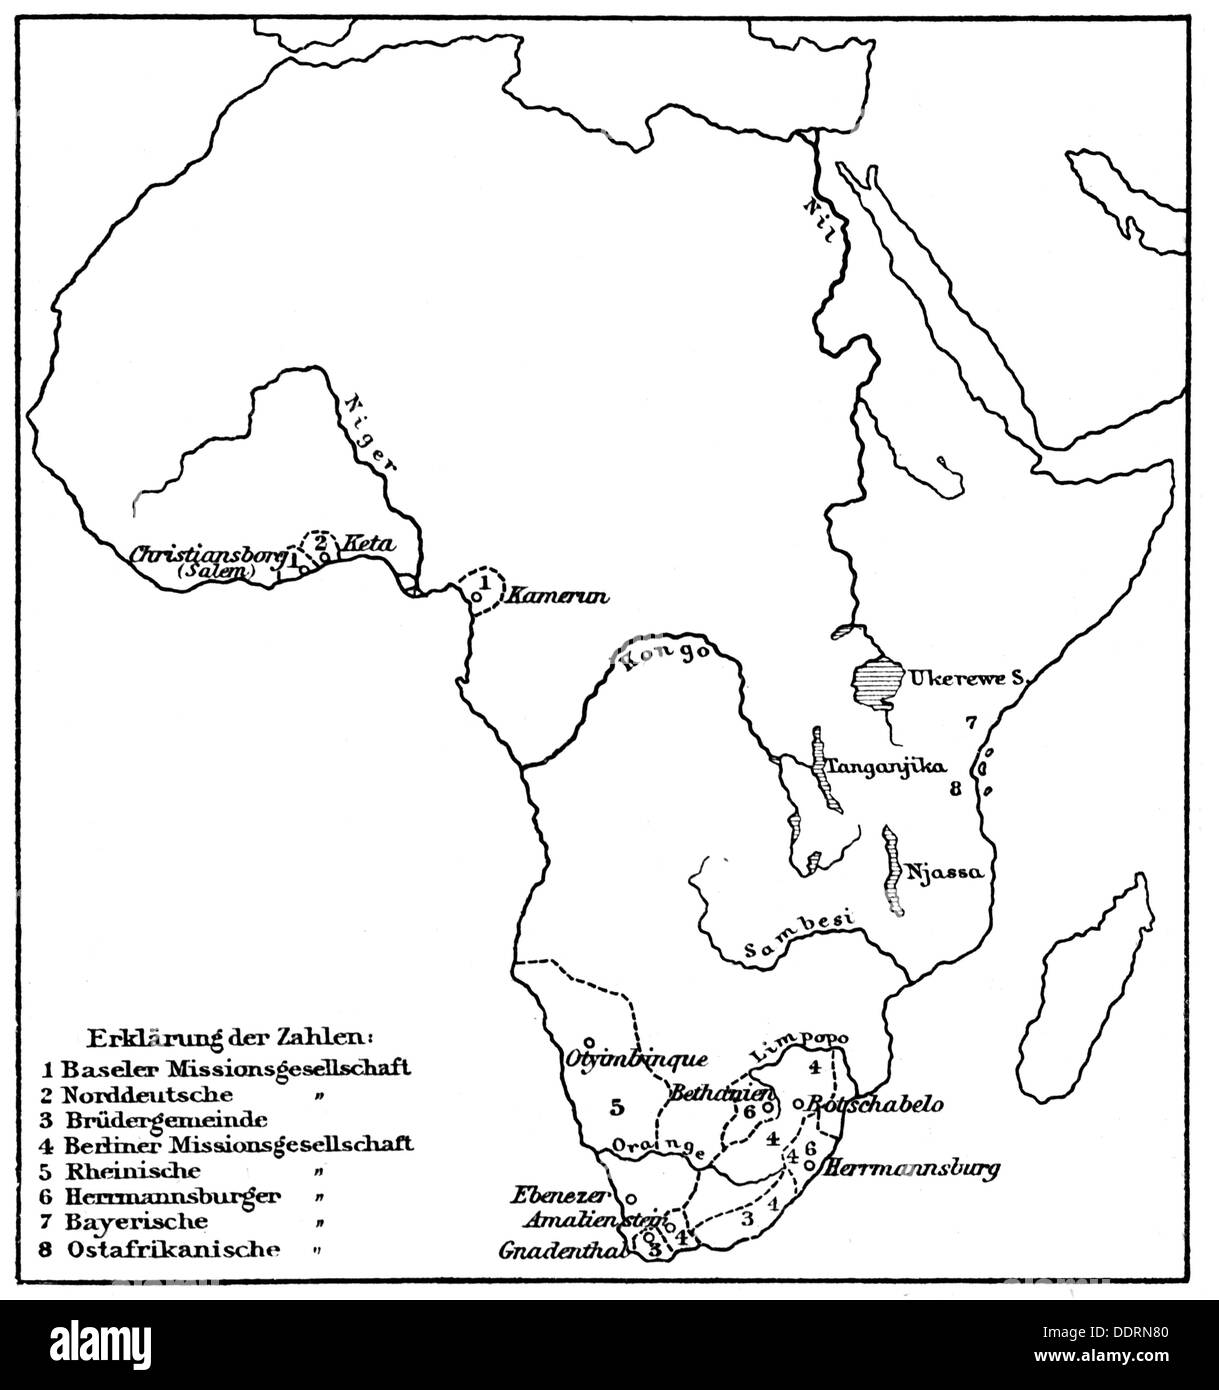 cartography, thematic map, territories of German mission in Africa, 1: Basel missionary society, 2: North German missionary society, 3: Brethren assembly, 4: Berlin missionary society, 5: Rhenish missionary society, 6: Bavarian missionary society, 7: East African missionary society, wood engraving, late 19th century, mission, missions, religion, religions, Christianity, Nile, congo, Niger, river, rivers, continent, continents, proseltyting, Germany, German Empire, Imperial Era, cartography, map printing, map, maps, historic, historical, Additional-Rights-Clearences-Not Available Stock Photo